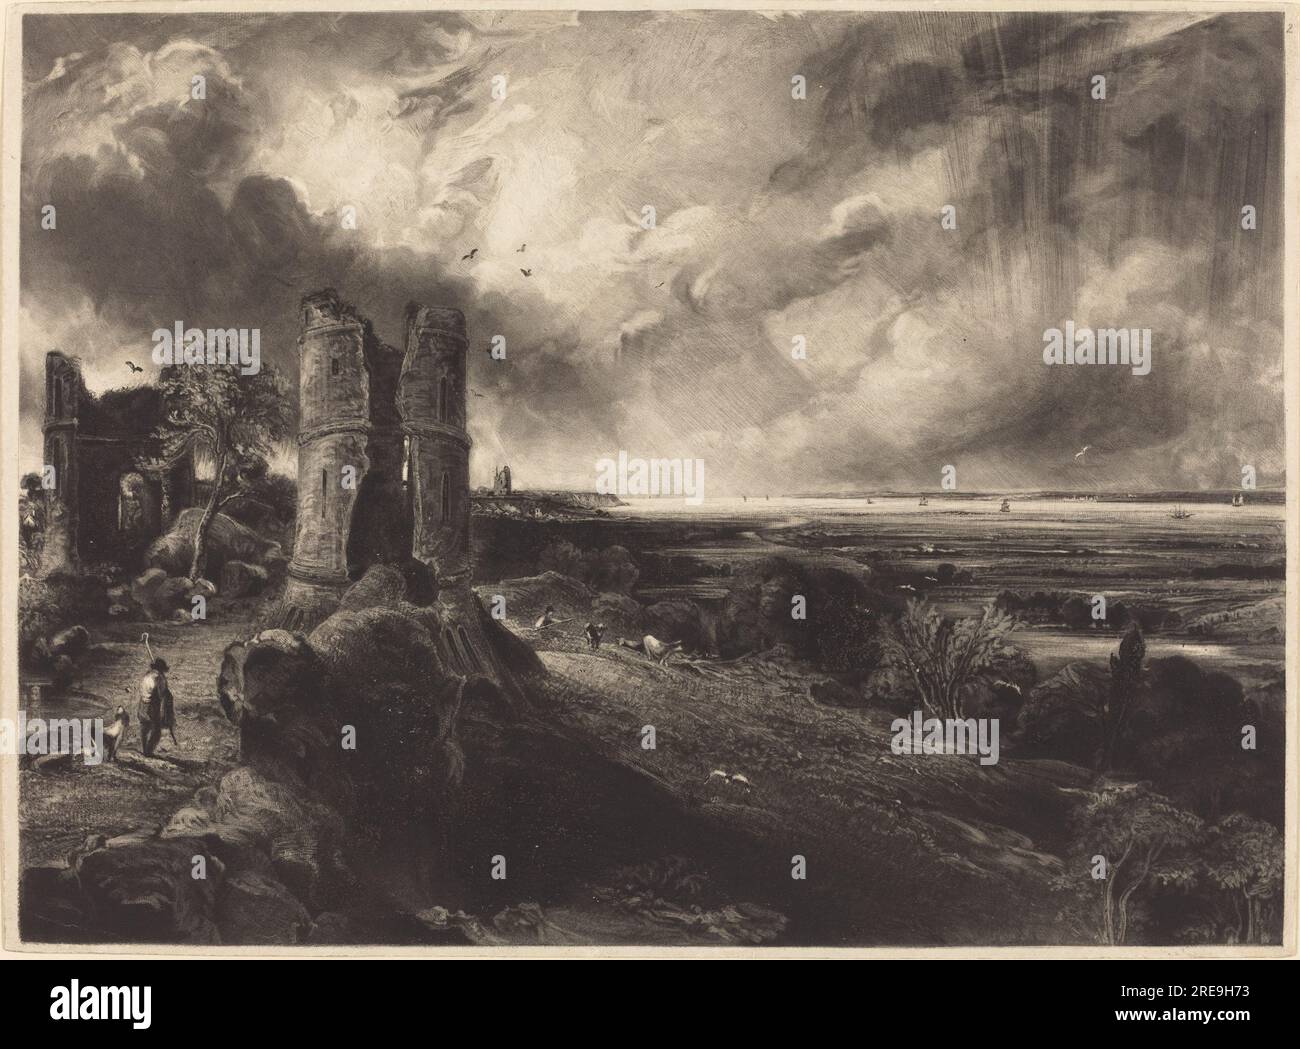 'David Lucas after John Constable, Hadleigh Castle (Large Plate), 1830 and 1832, mezzotint [progress proof], plate: 26.7 x 36.5 cm (10 1/2 x 14 3/8 in.) sheet: 27.2 x 37.4 cm (10 11/16 x 14 3/4 in.)  overall (mat size): 40.6 x 55.9 cm (16 x 22 in.), Andrew W. Mellon Fund, 1977.38.1' Stock Photo